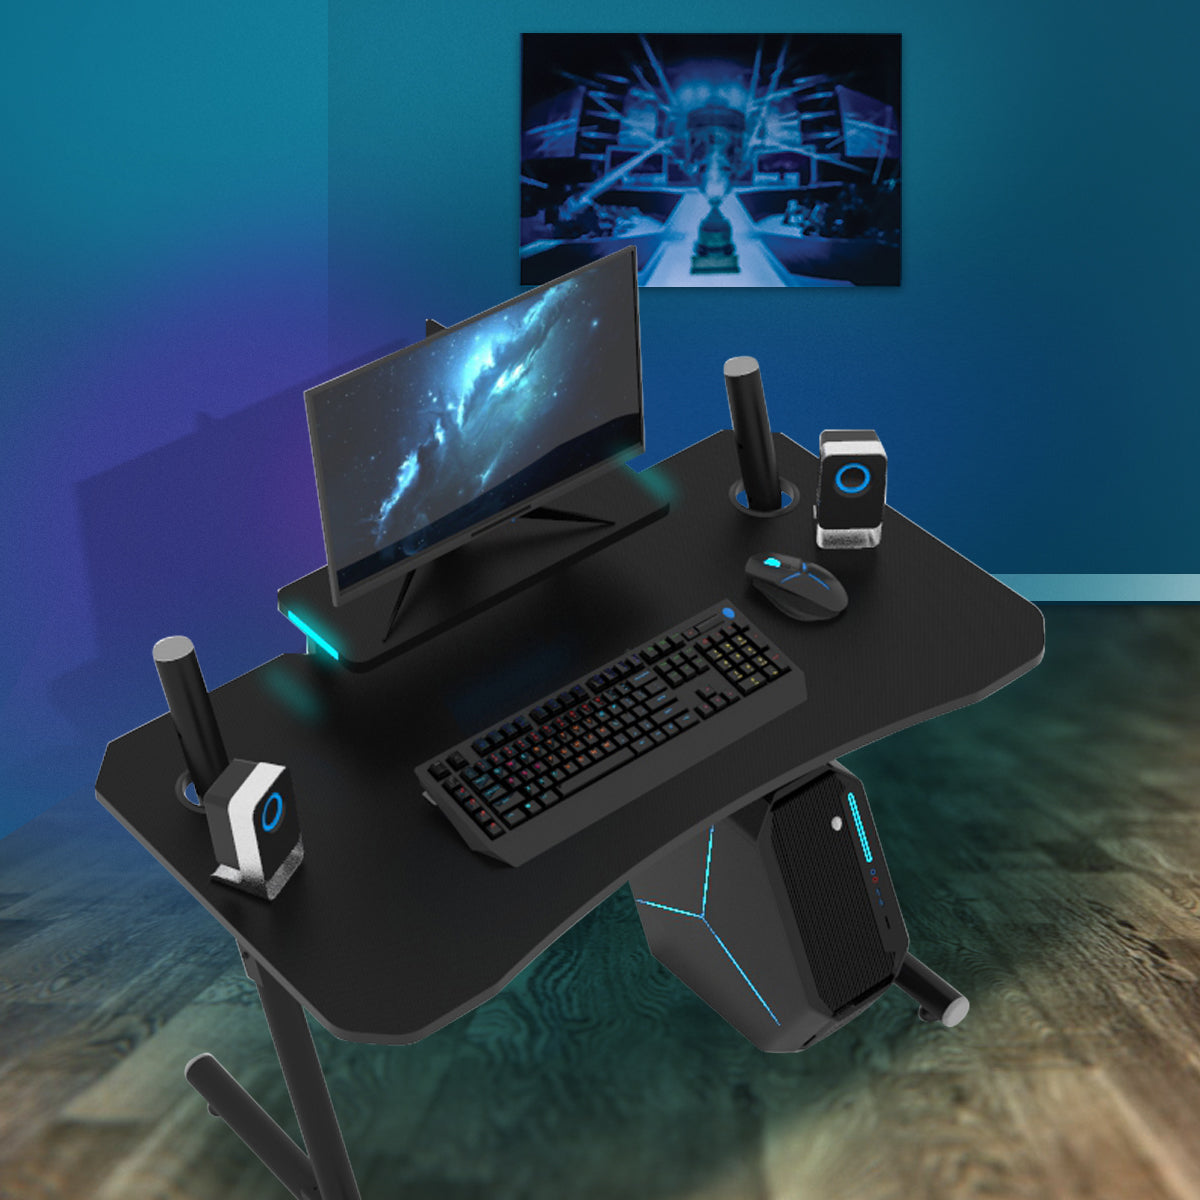 Computer Gaming Desk with LED Lights Monitor Stand 41 Inch PC Table Workstation